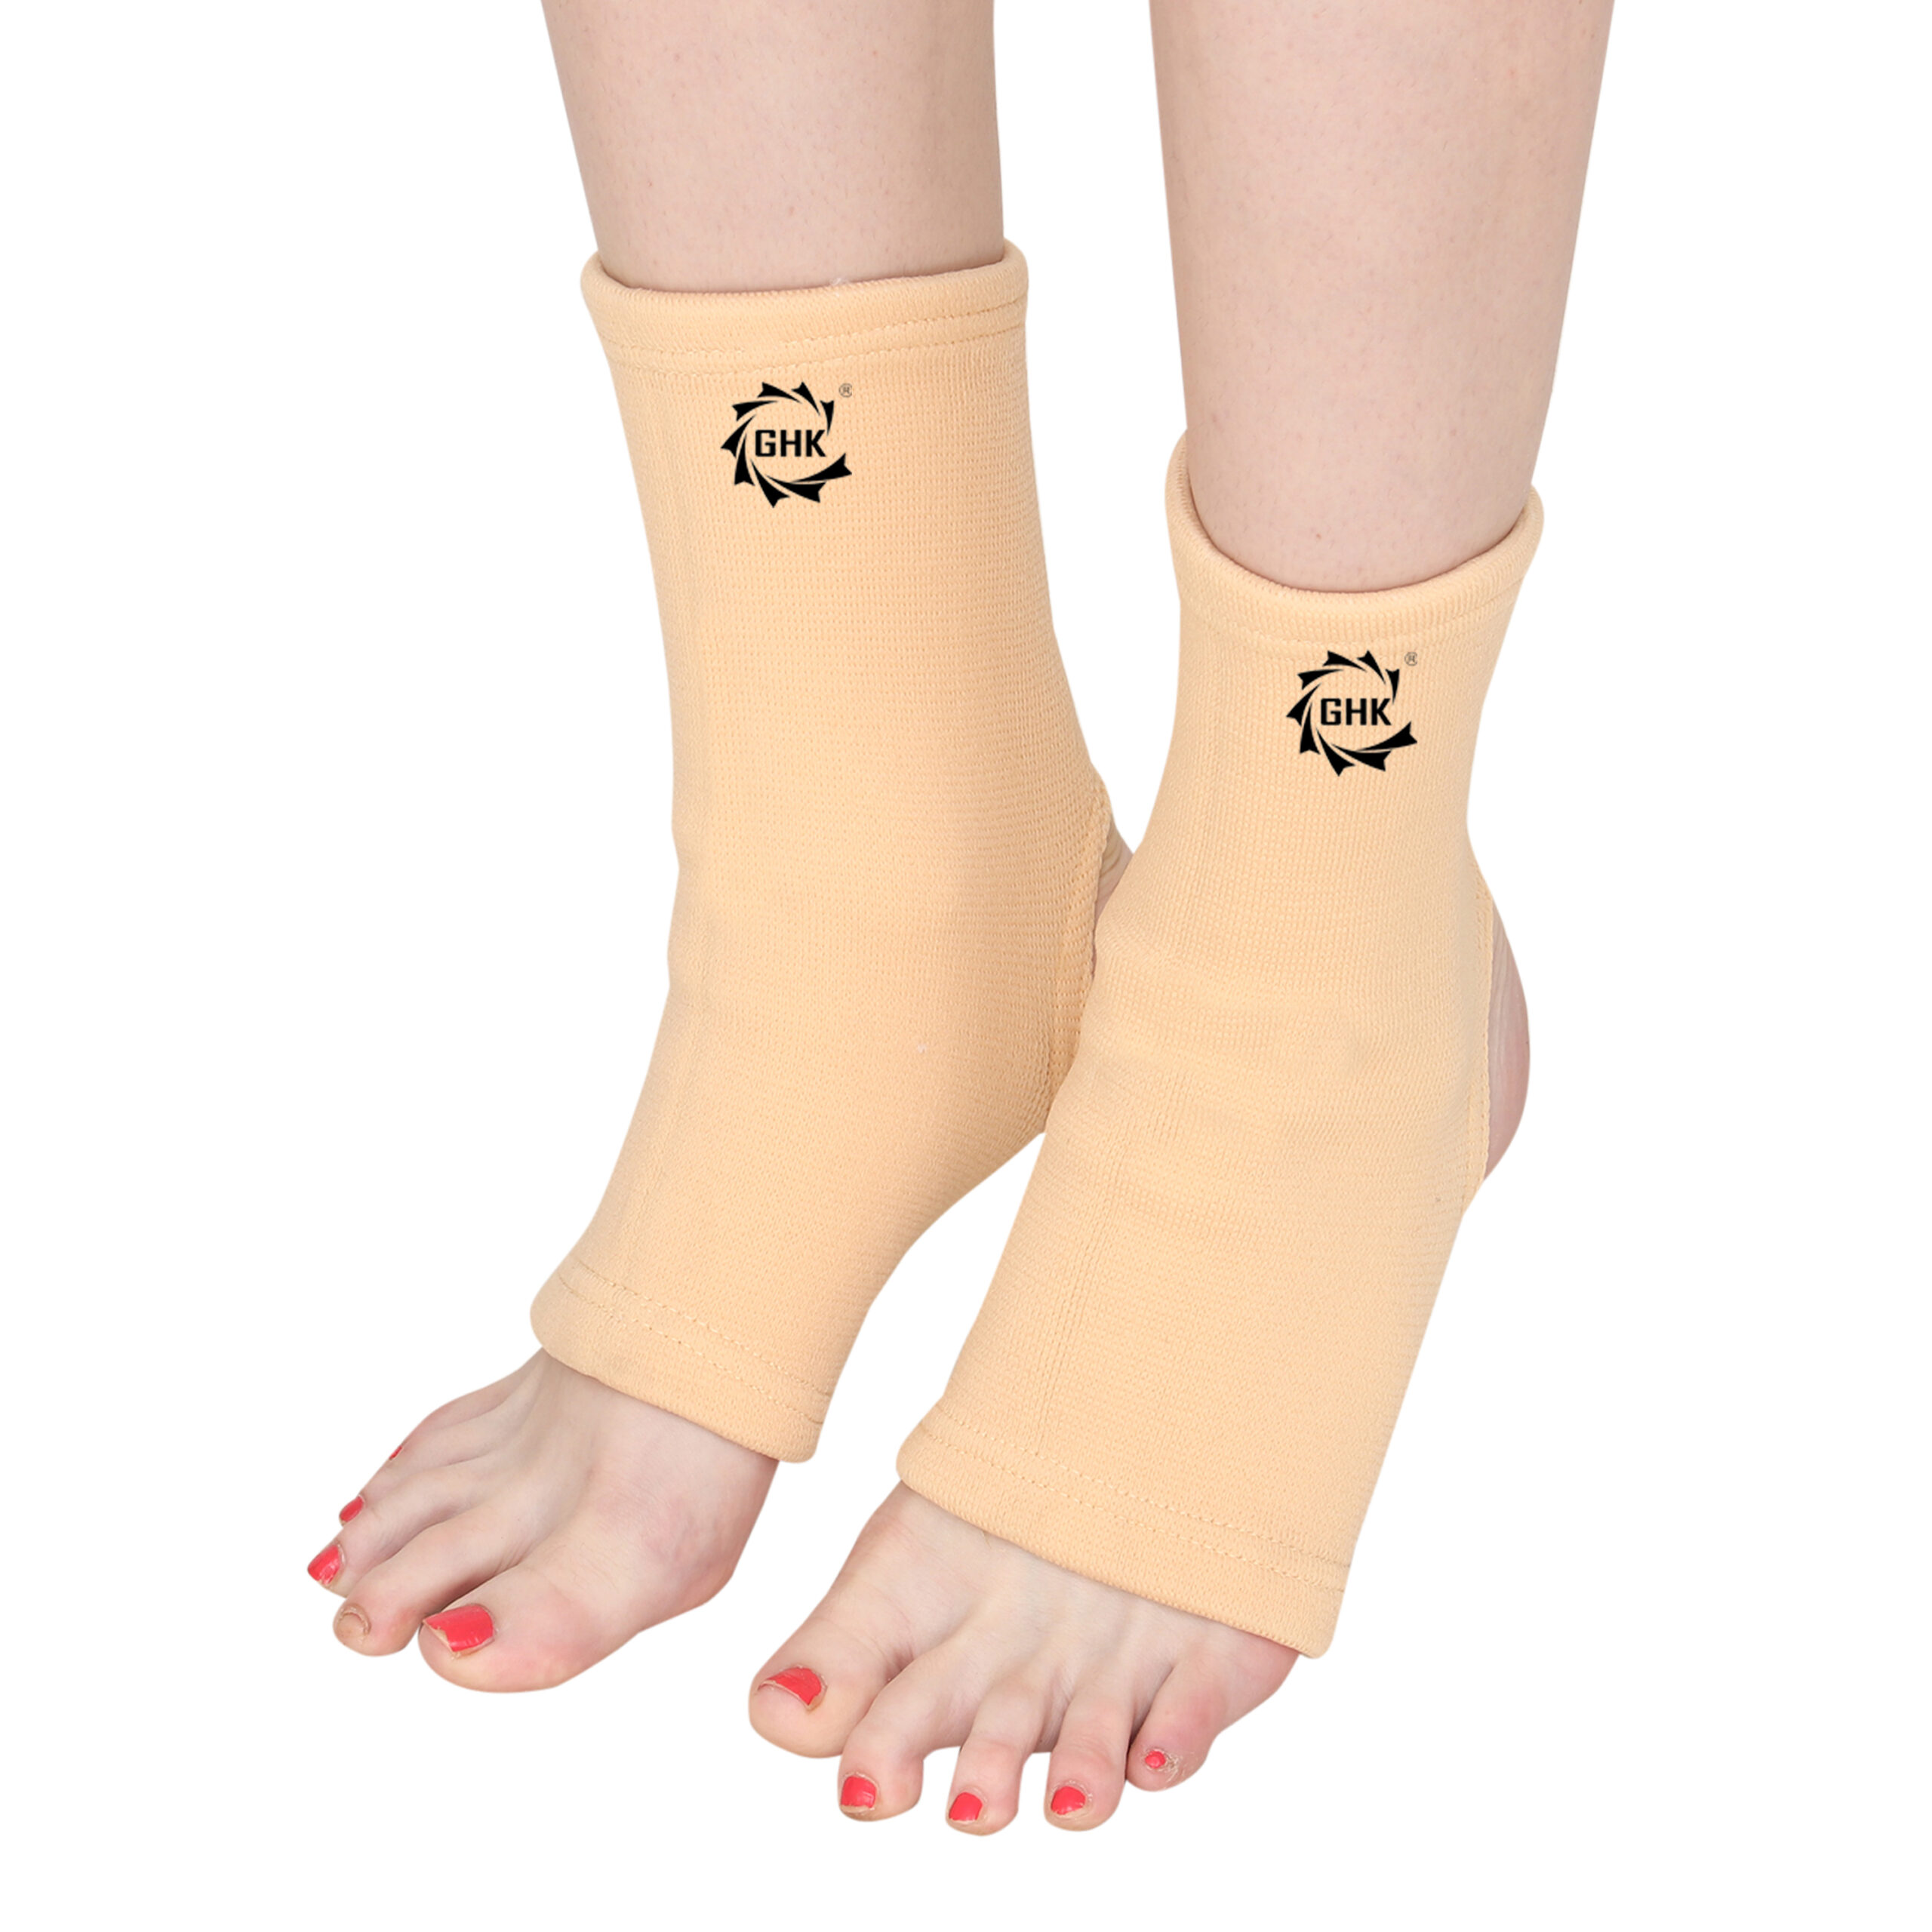 GHK S1 Ankle Support Stretchable & Flexible for Pain Relief in Sprains & Injuries (Unisex,Skin Colour)